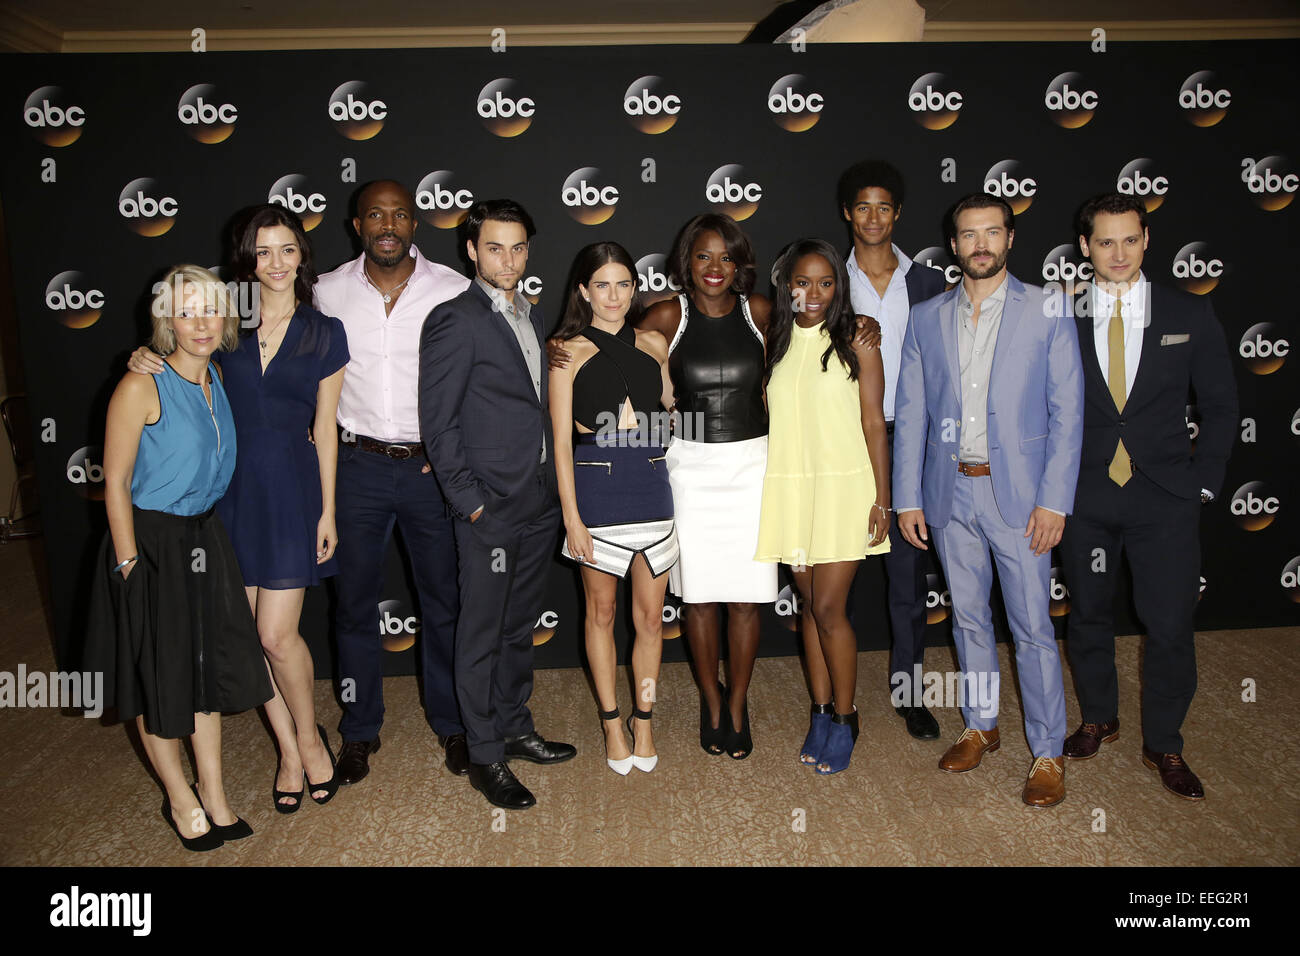 Celebrities attend Disney | ABC TCA 2014 Summer Press Tour at The Beverly Hilton hotel - Arrivals  Featuring: Betsy Beers,Katie Findlay,Billy Brown,Jack Falahee,Karla Souza,Viola Davis,Aja Naomi King,Alfred Enoch,Charlie Weber,Matt McGorry Where: Beverly Stock Photo